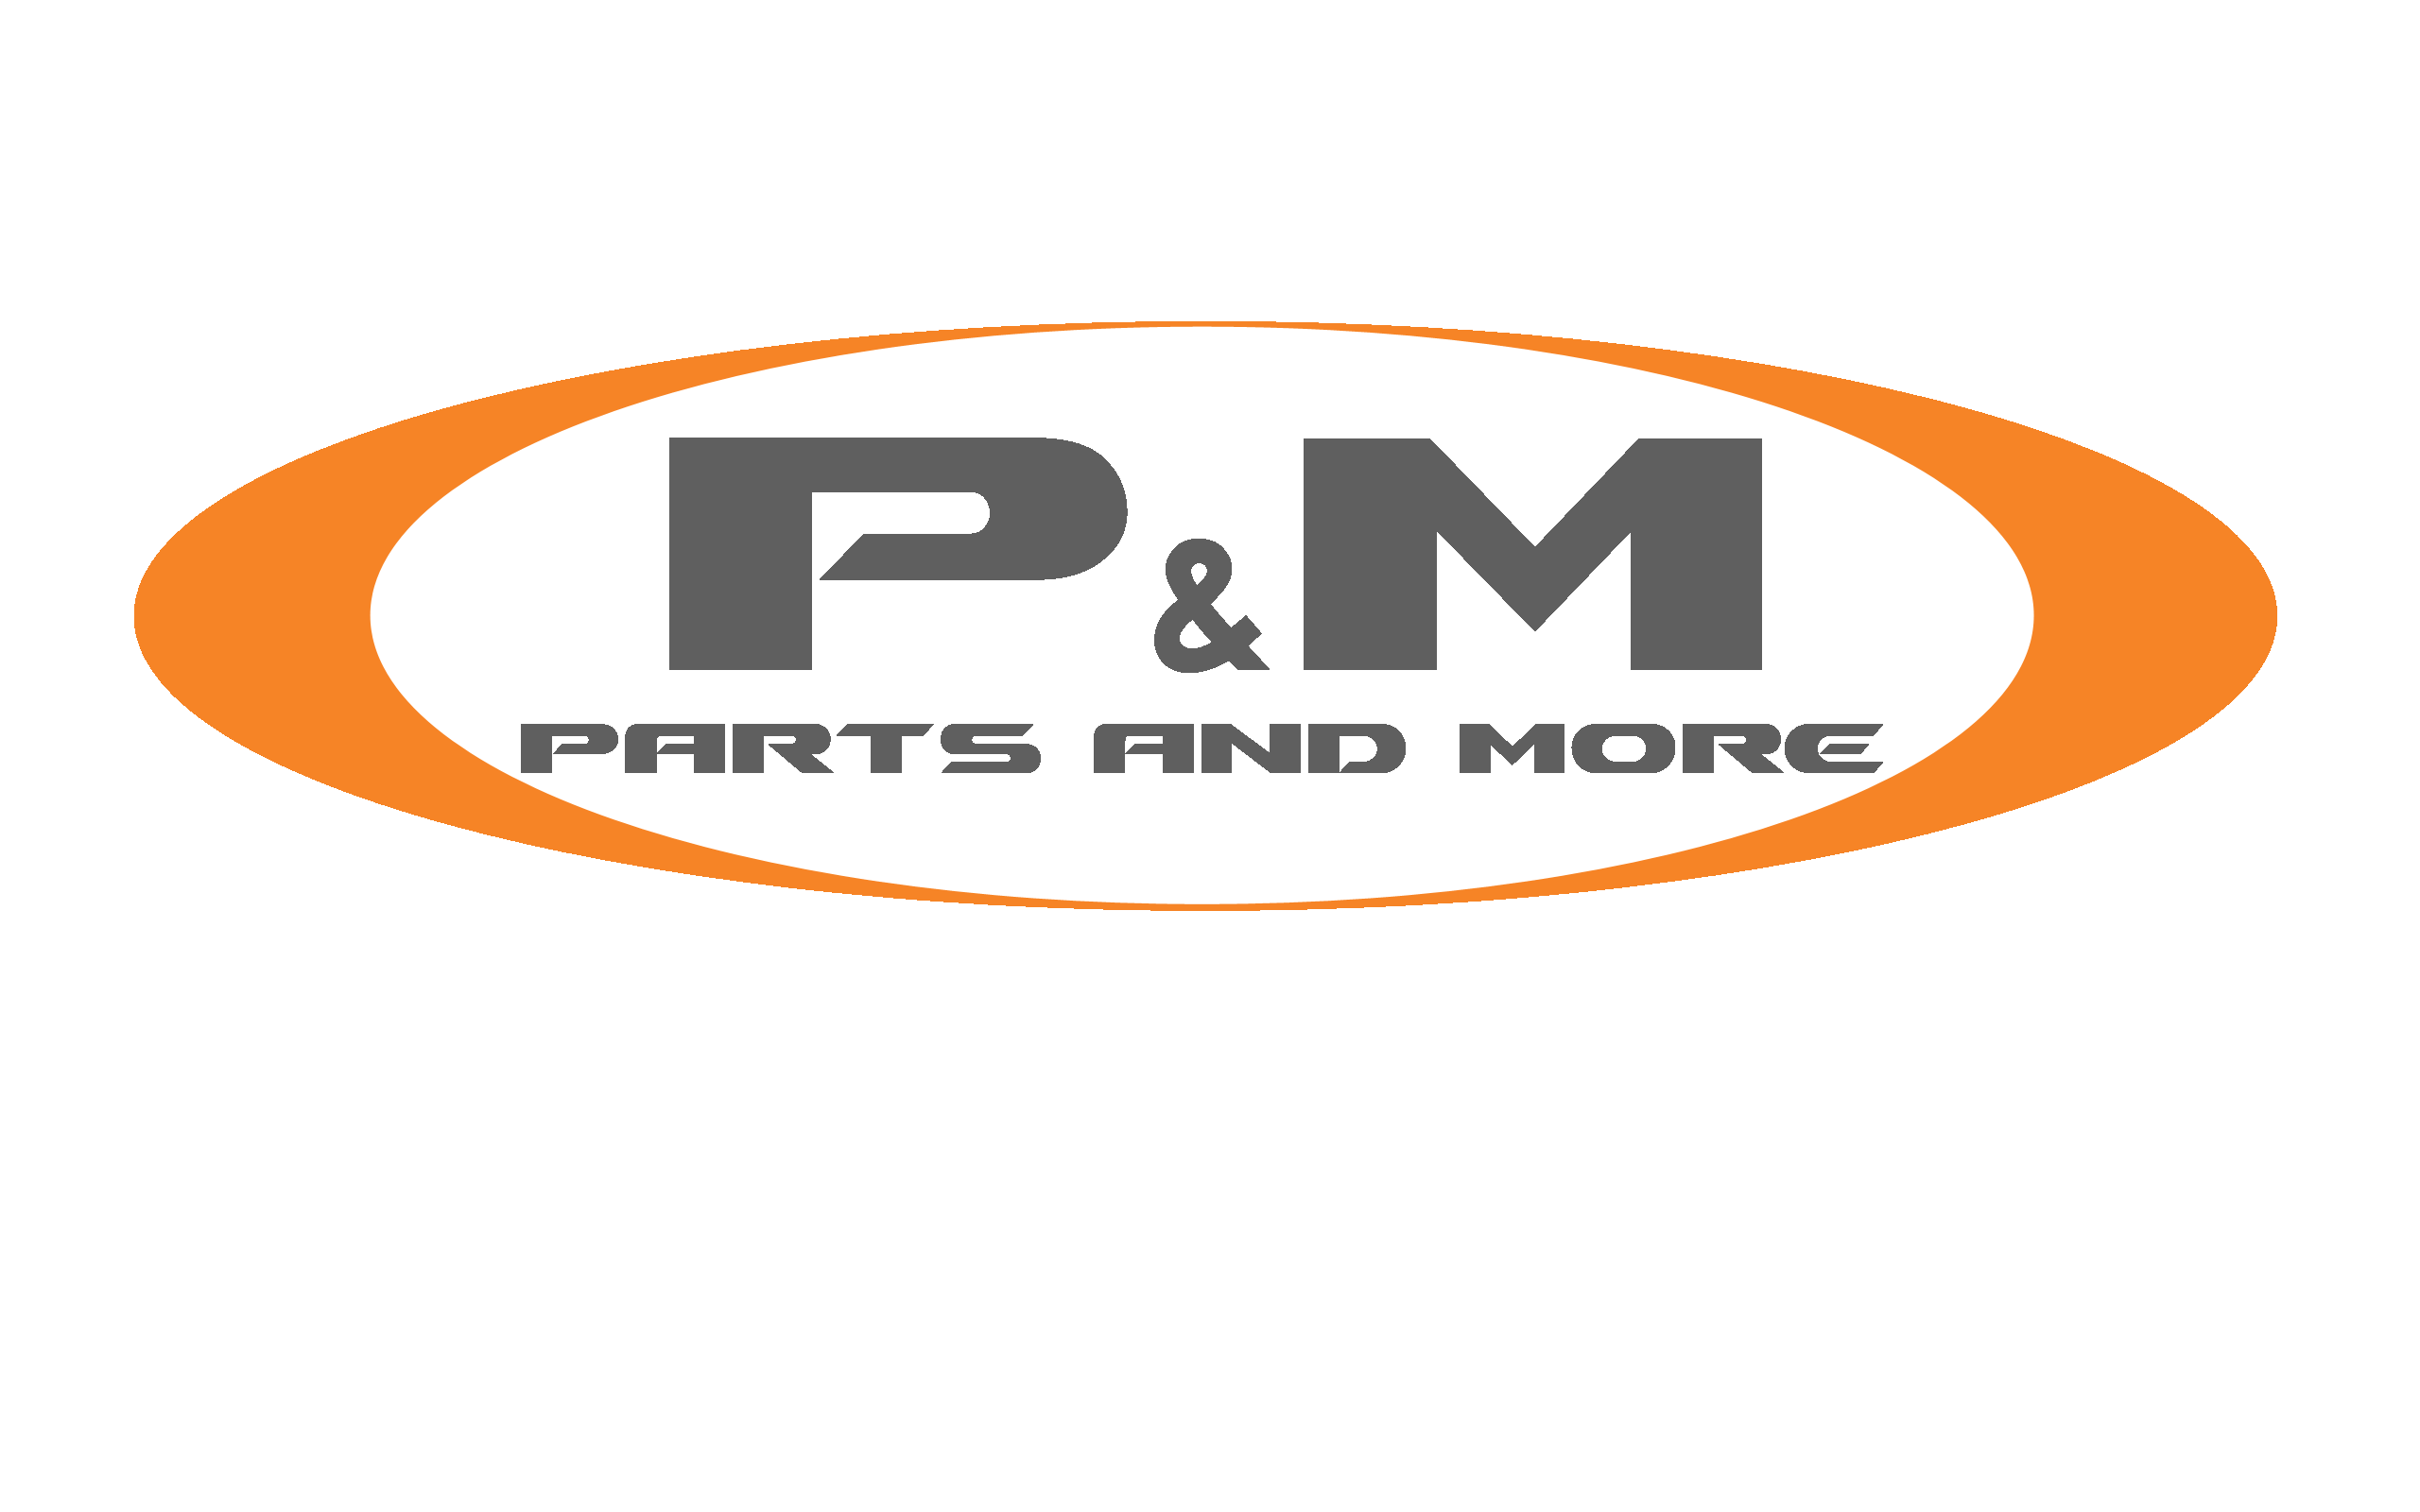 PARTS AND MORE